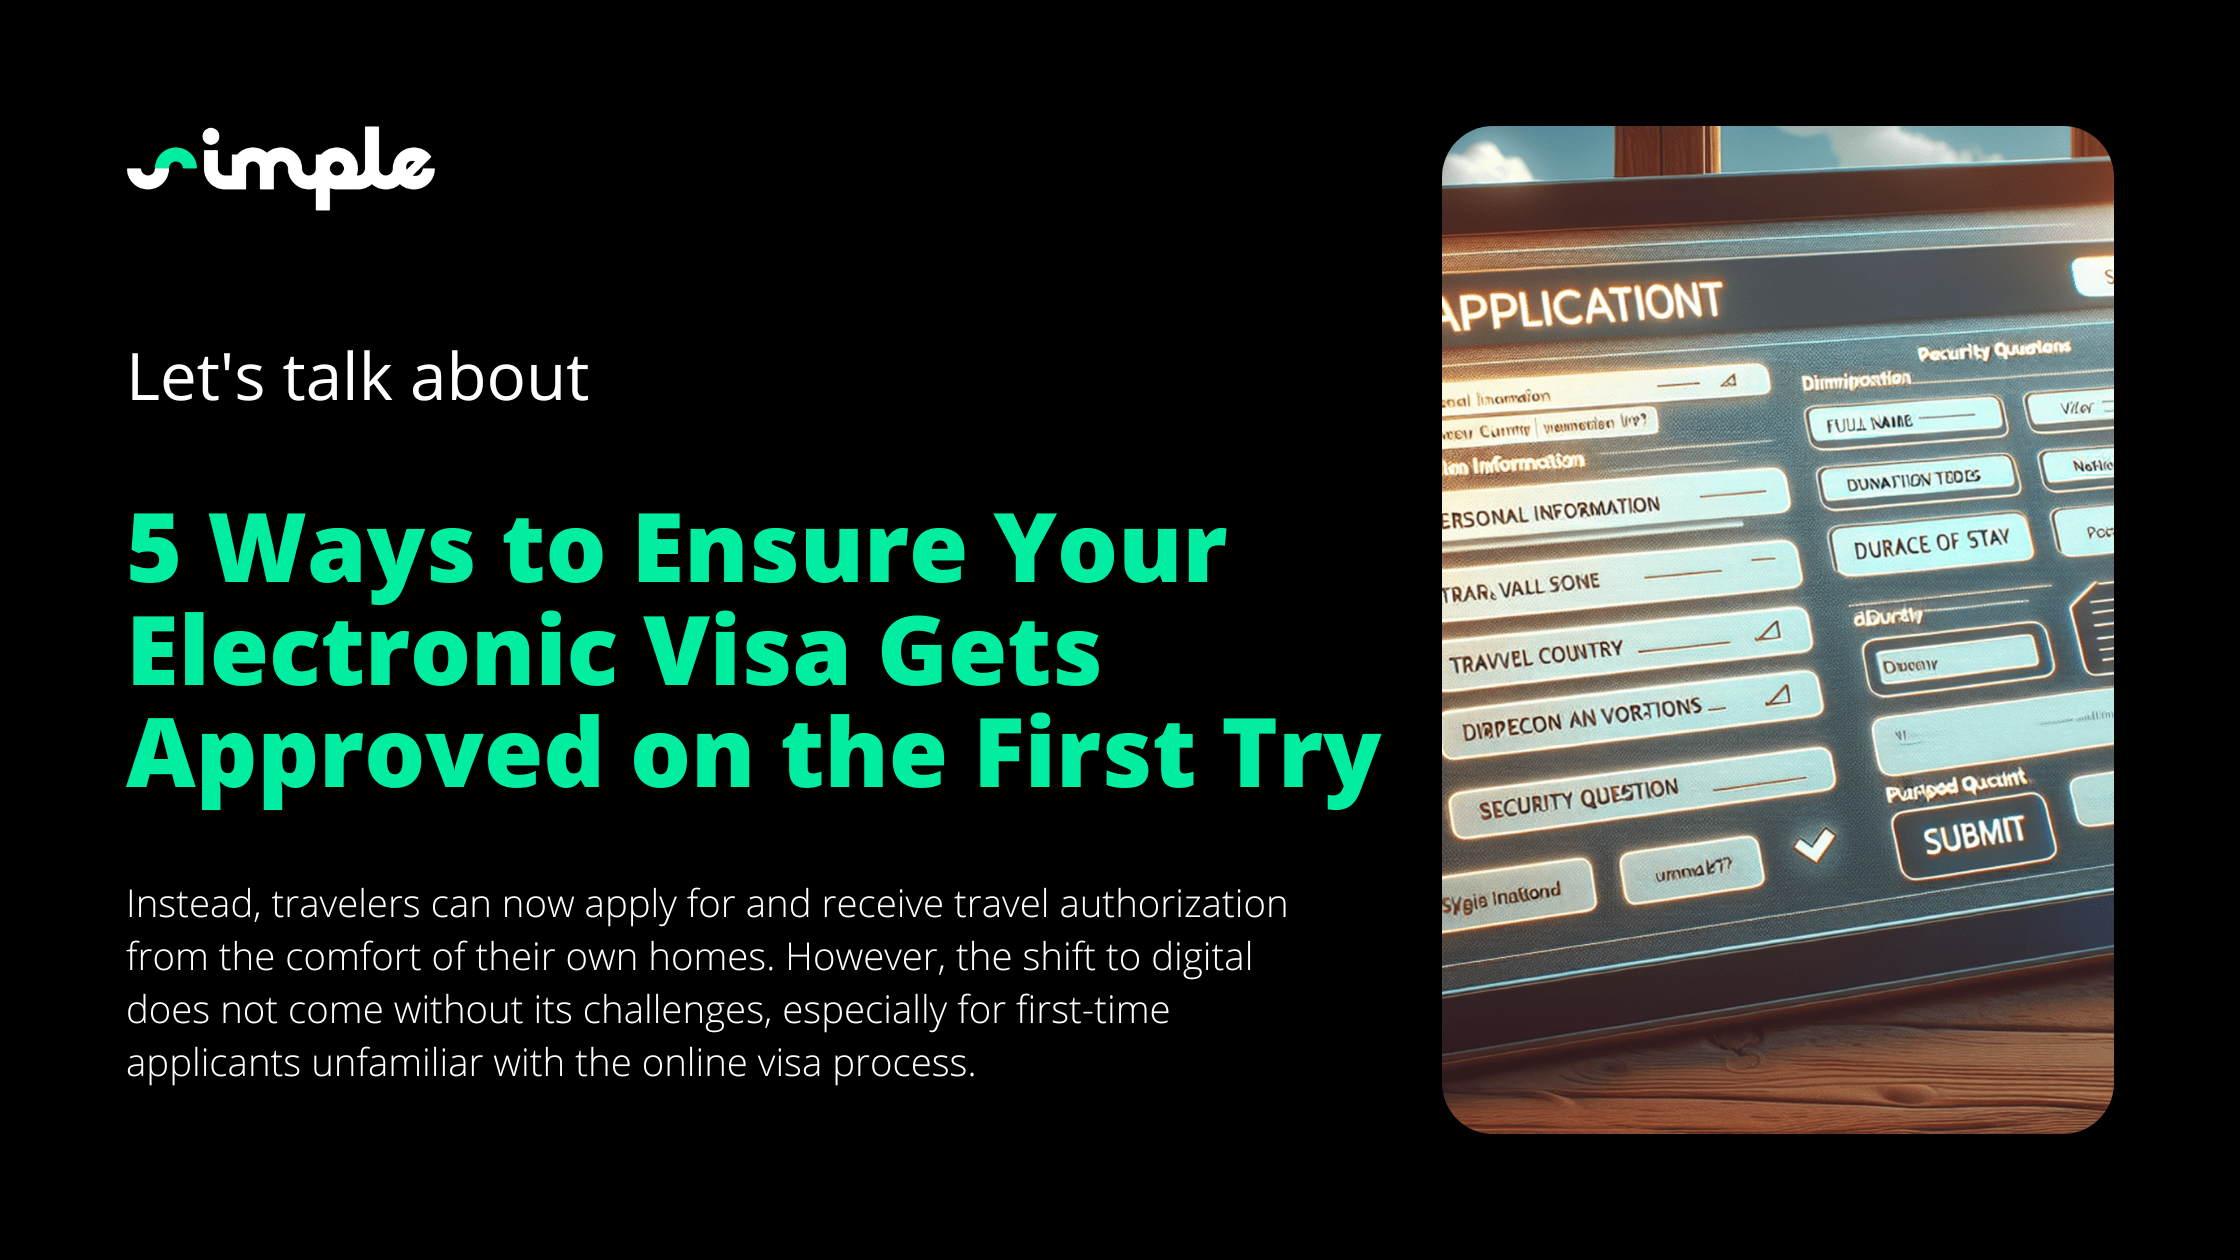 5 Ways to Ensure Your Electronic Visa Gets Approved on the First Try